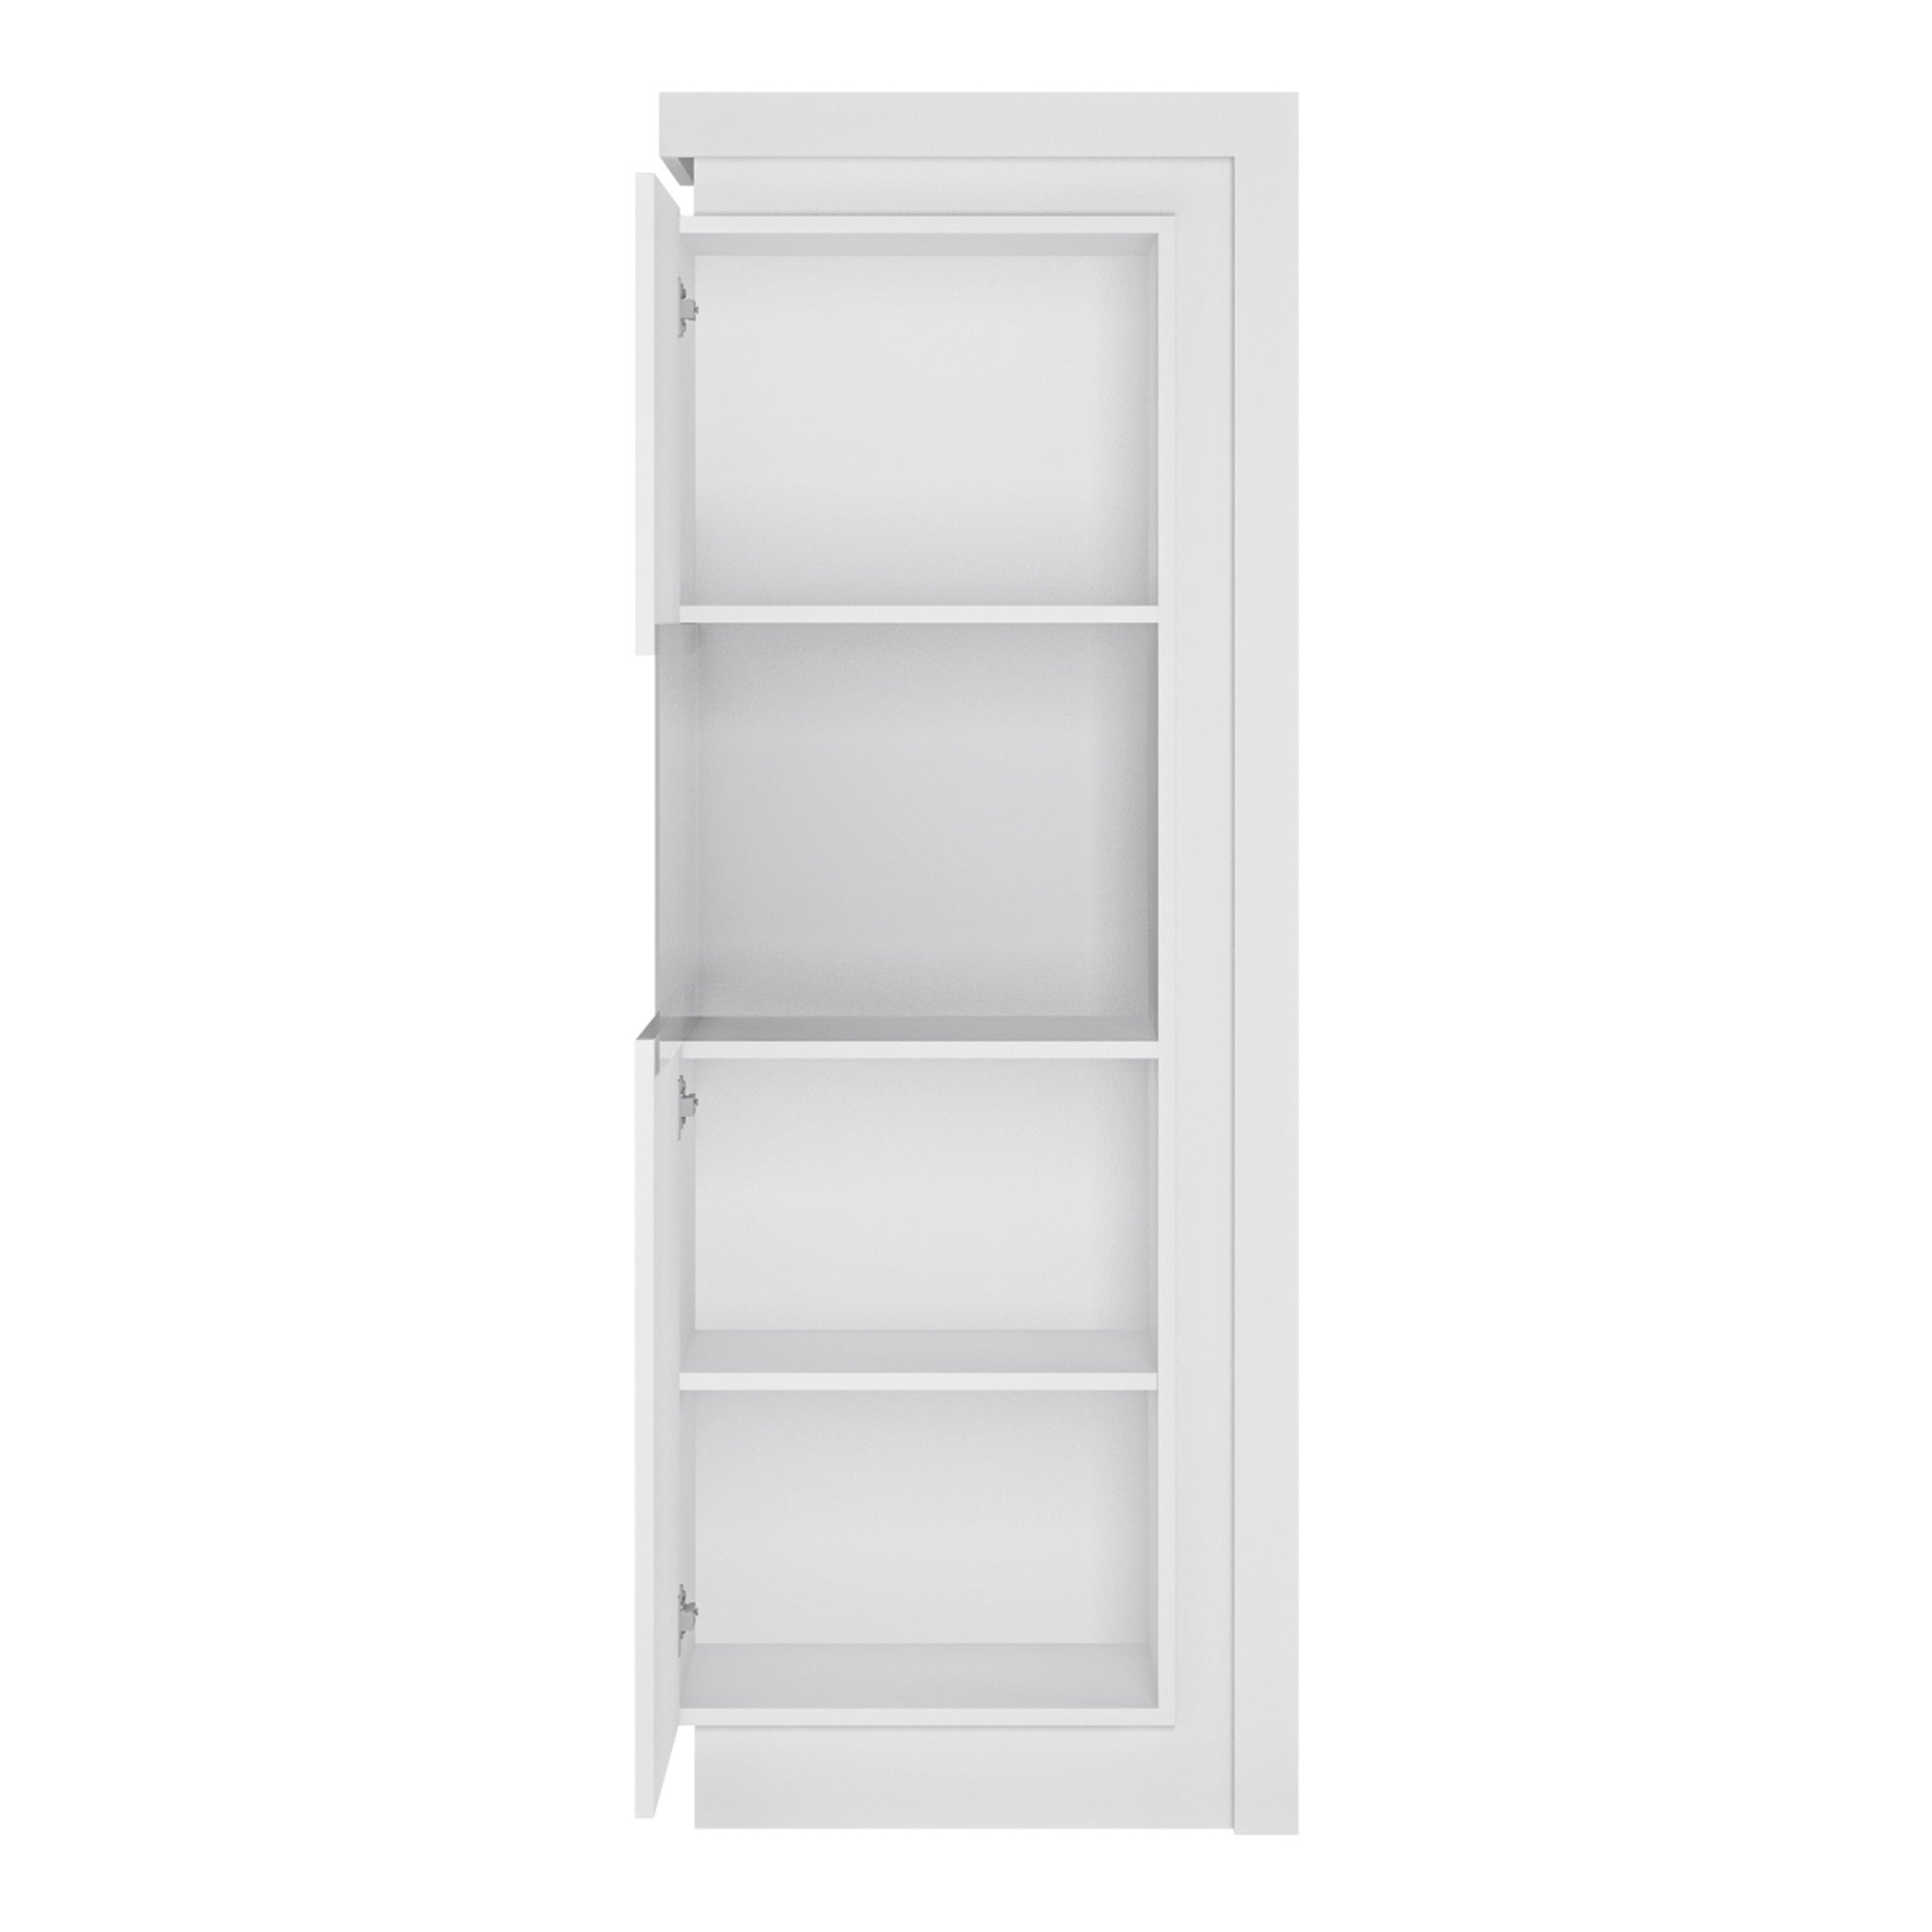 Lyon  Narrow display cabinet (LHD) 164.1cm high (including LED lighting) in White and High Gloss